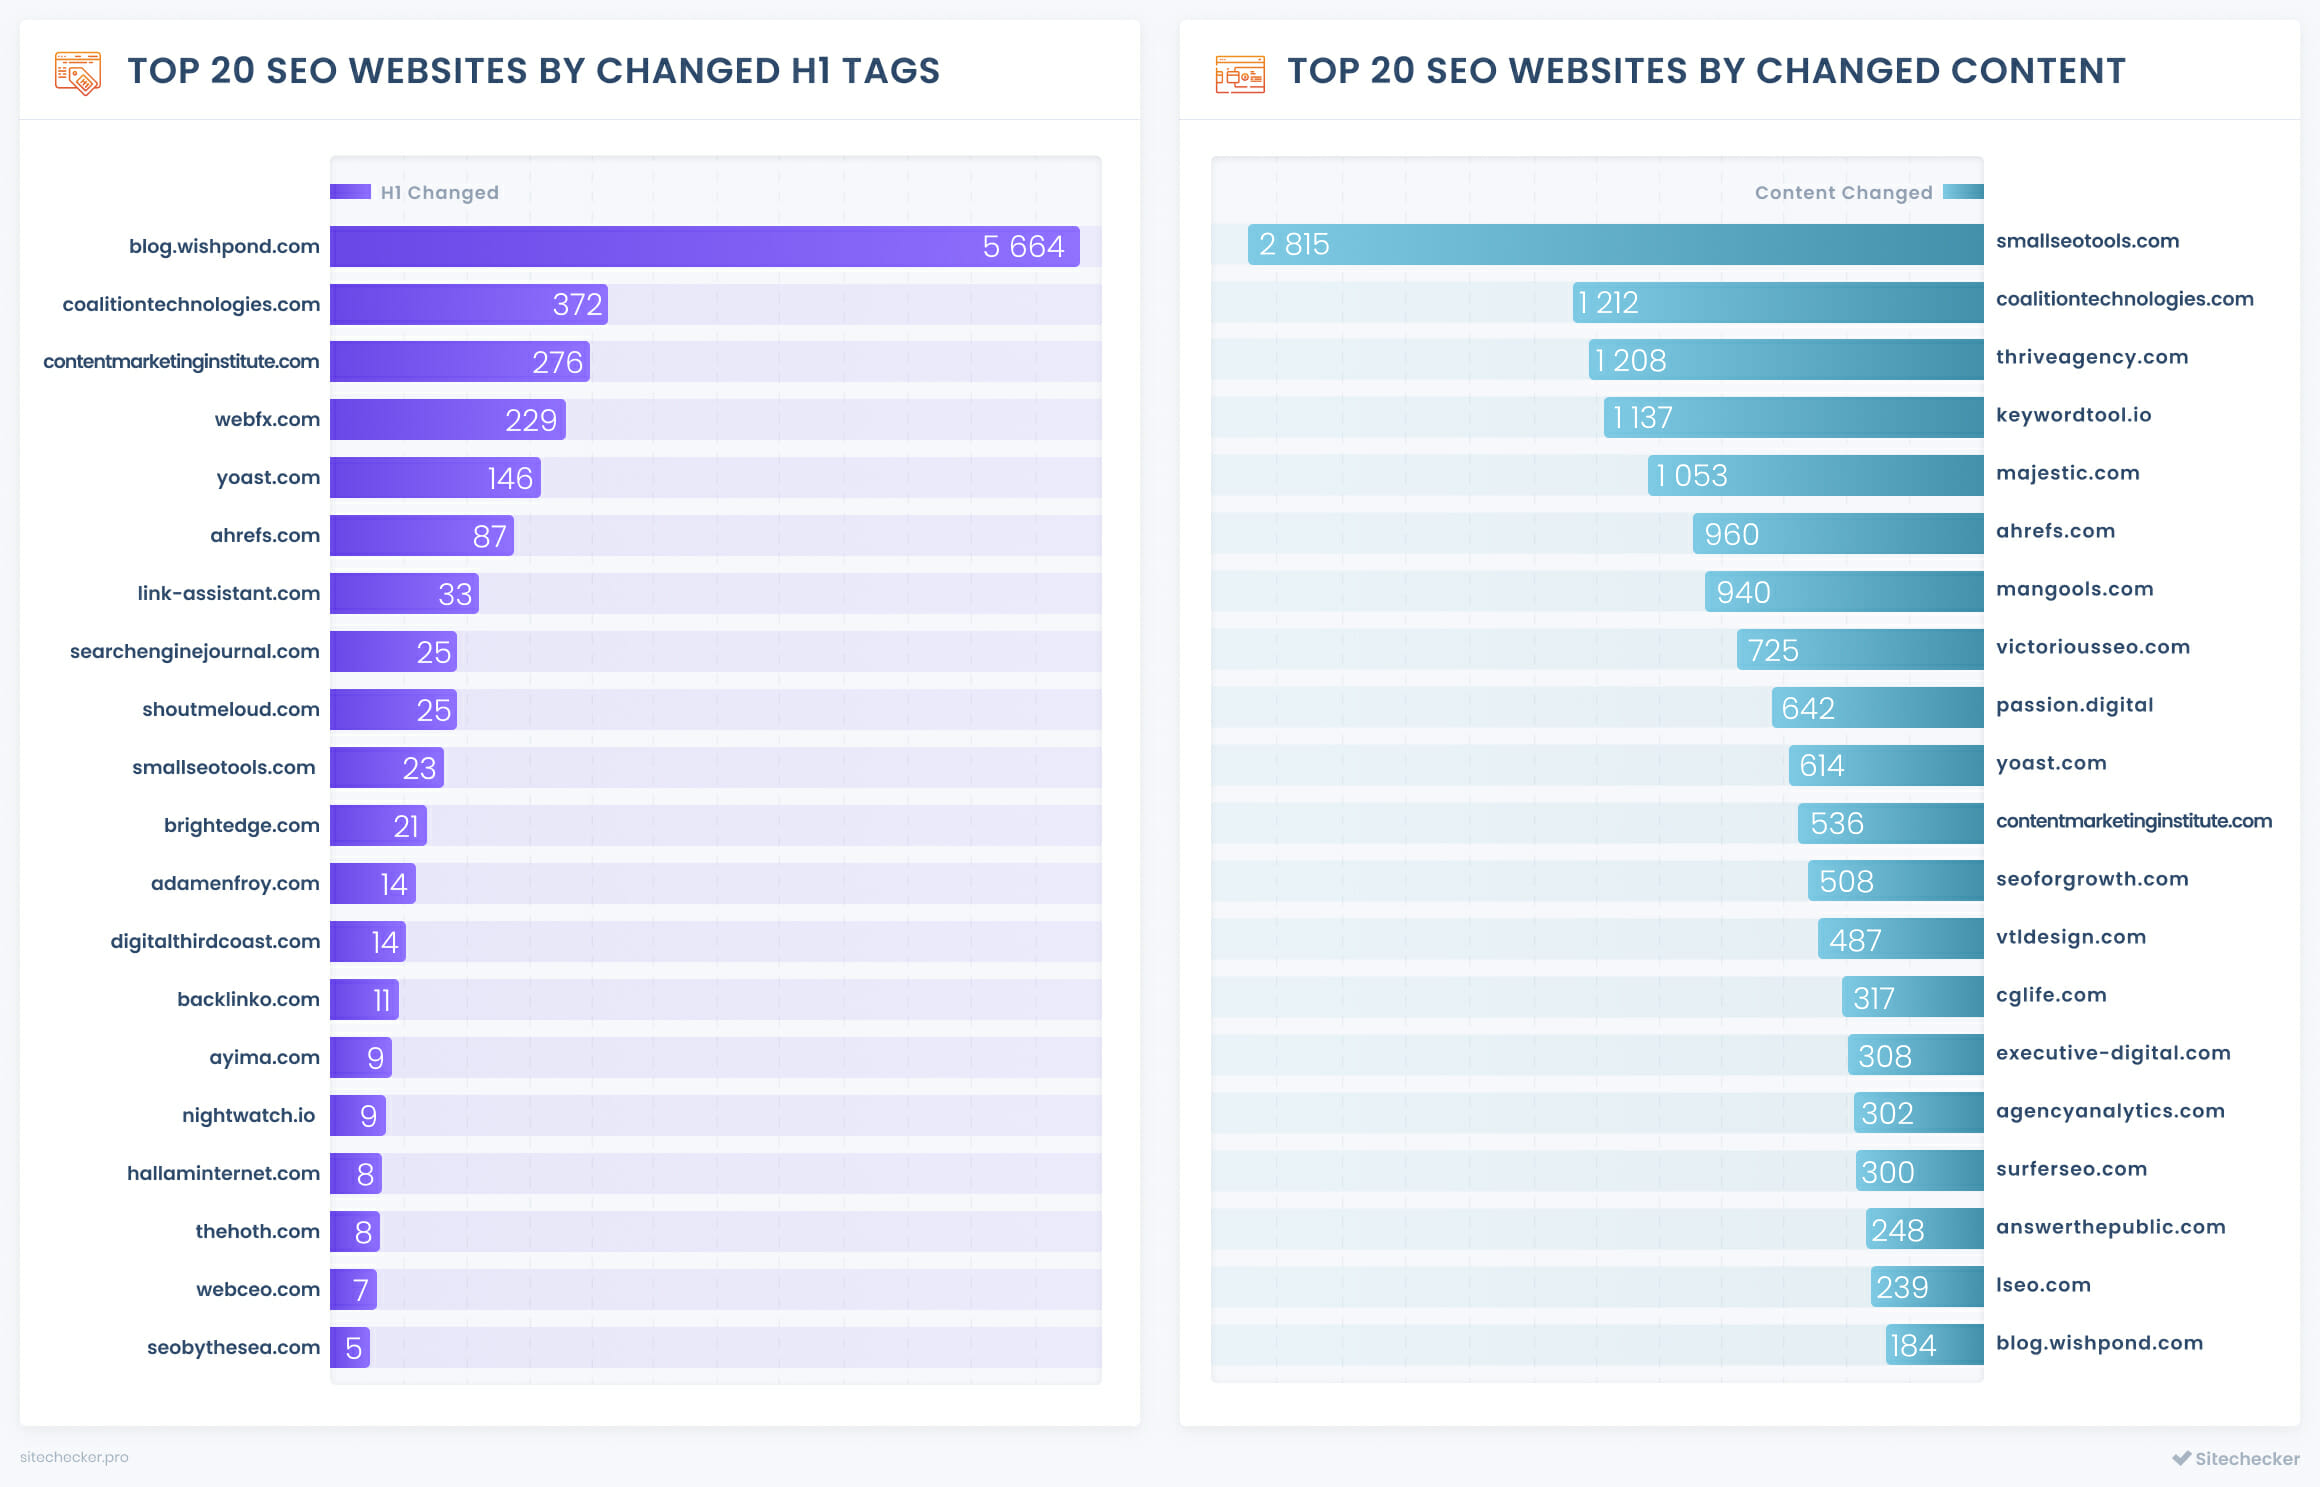 top 20 seo websites by changed h1 and content